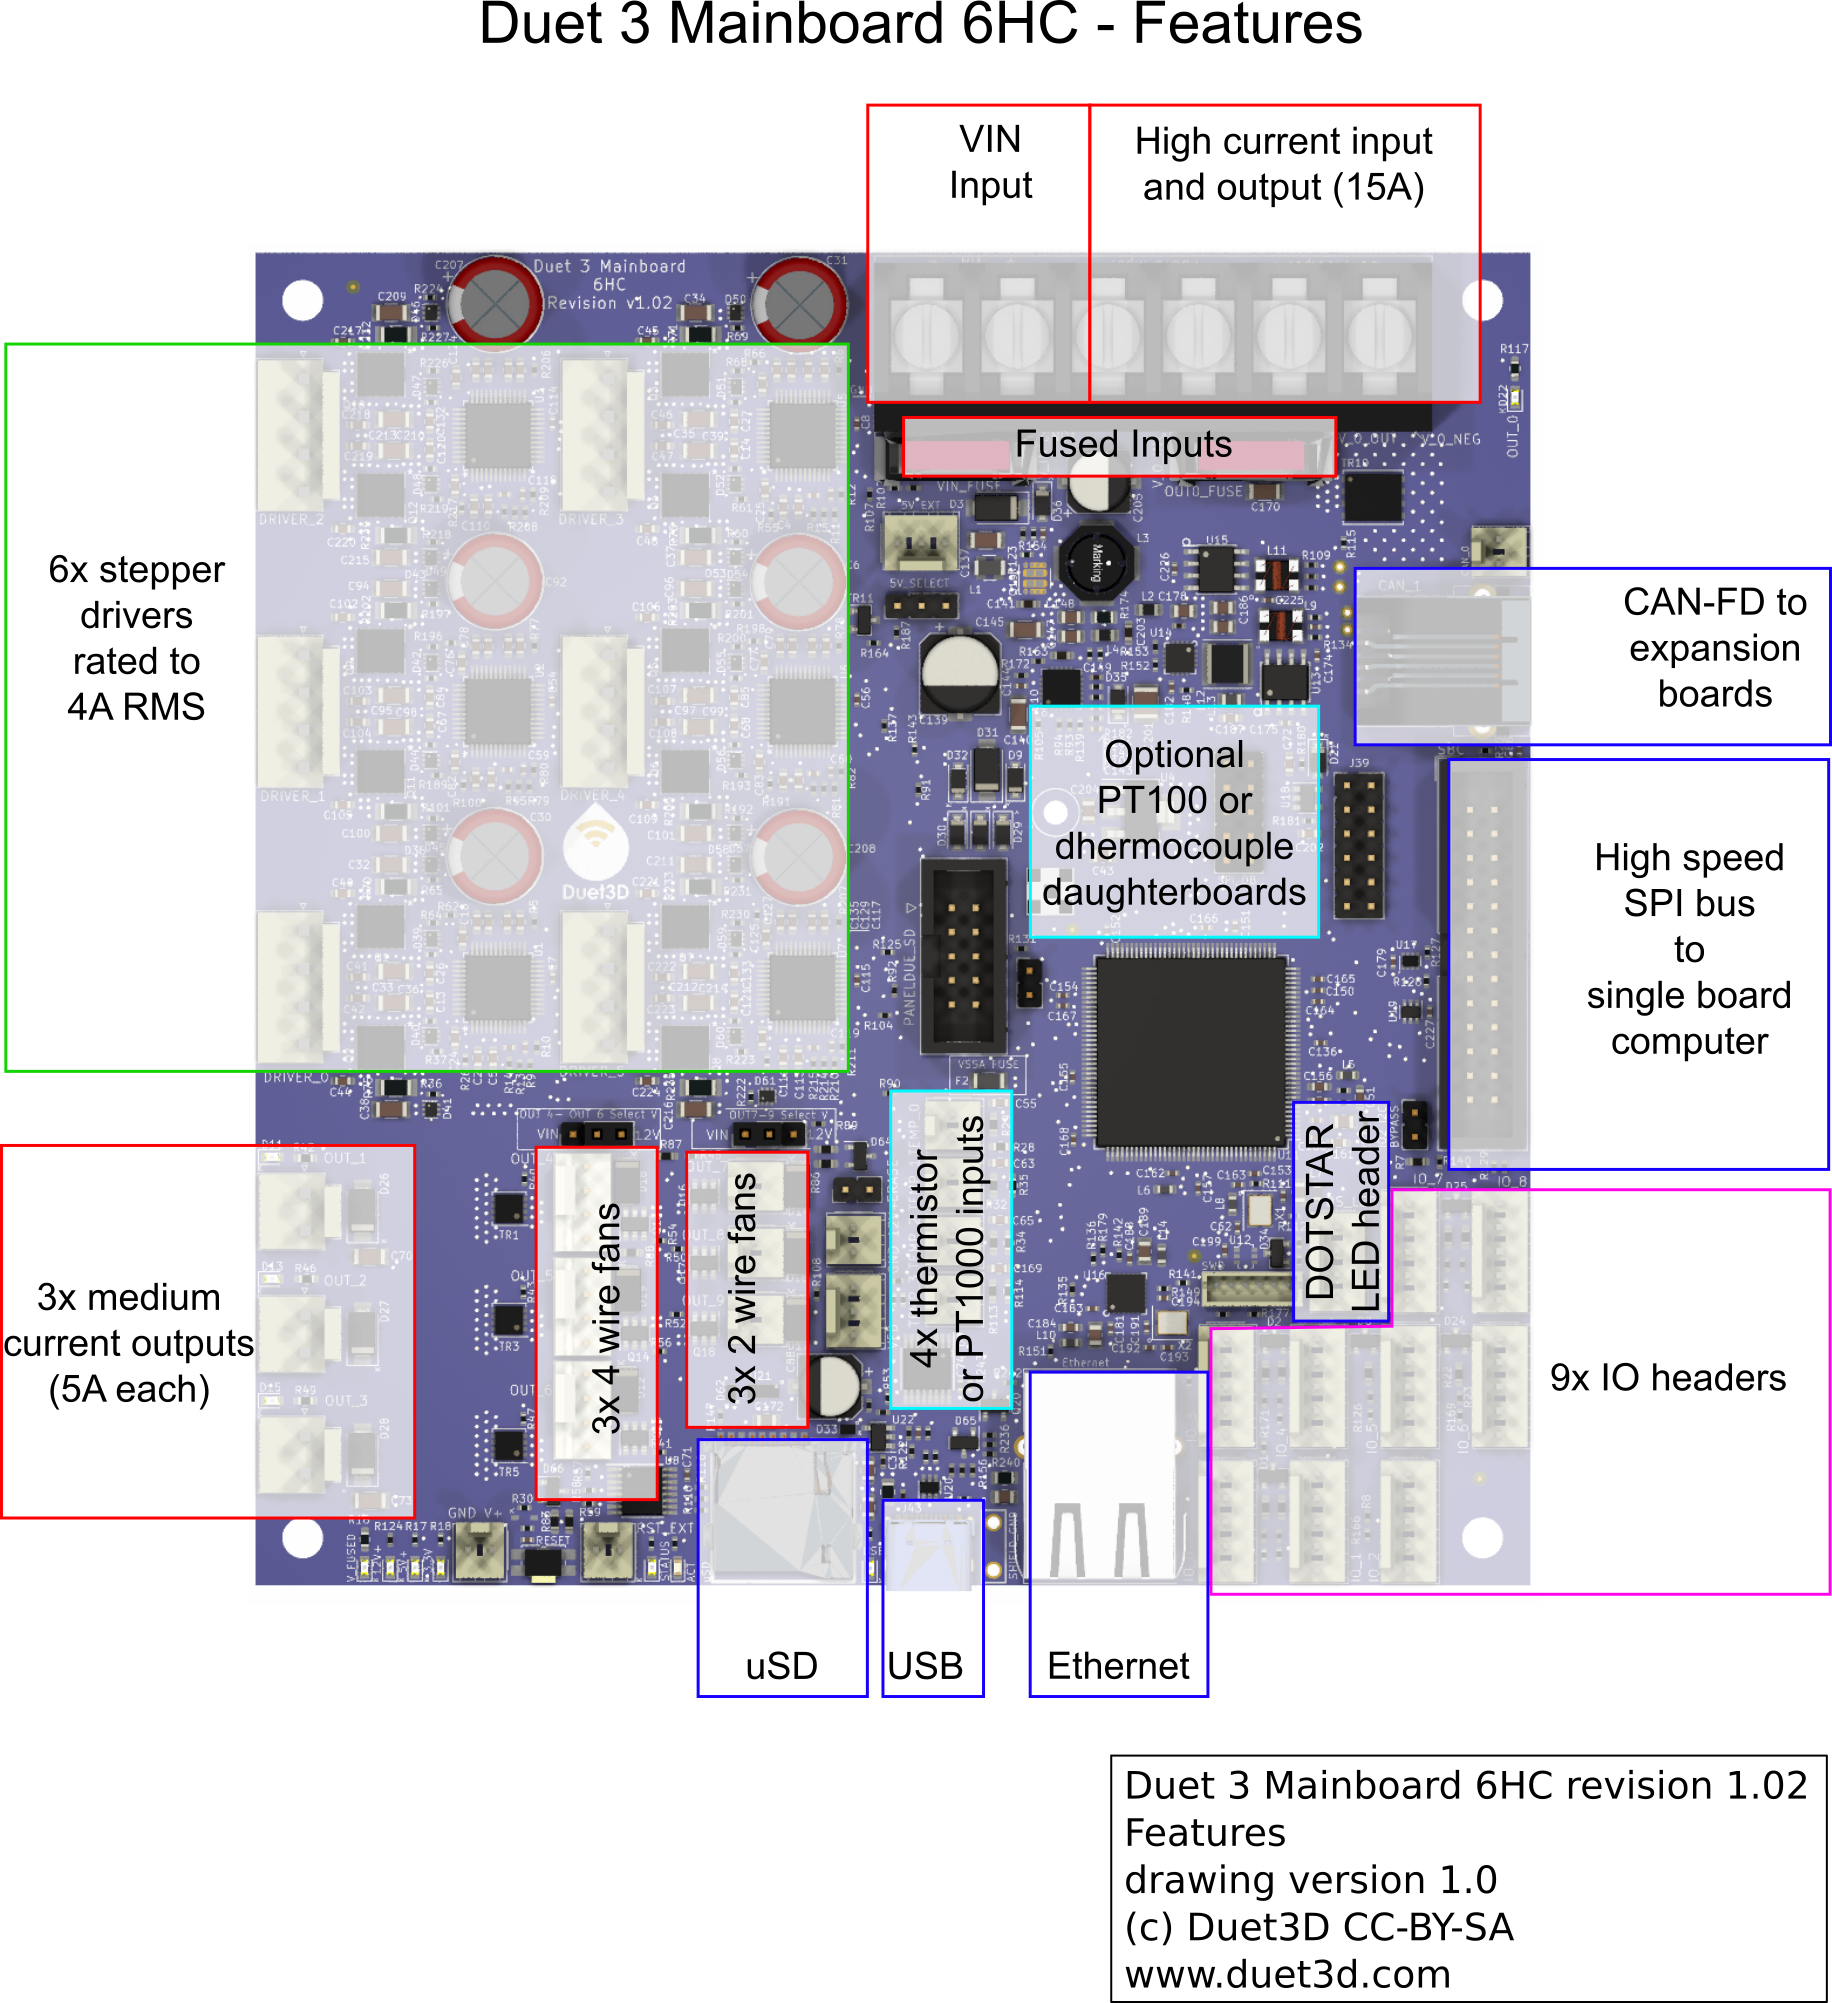 Render of the Duet3 Mainboard 6HC v1.02 overlaid with the key features of the board grouped by location